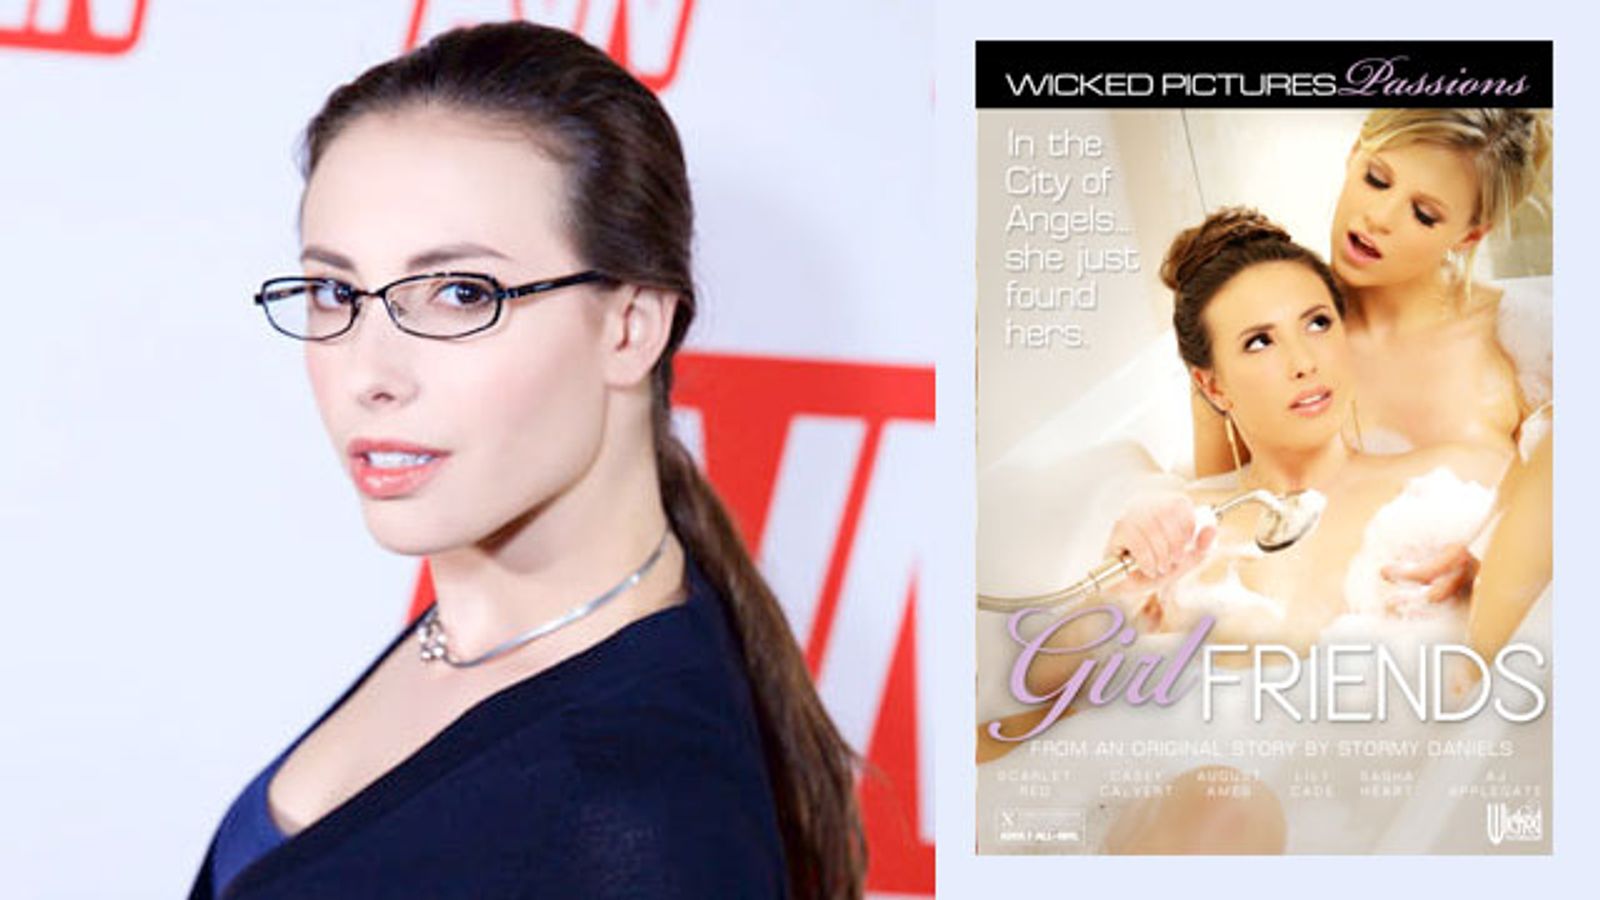 Casey Calvert Stars in Wicked Passions' 1st Lesbian Love Story